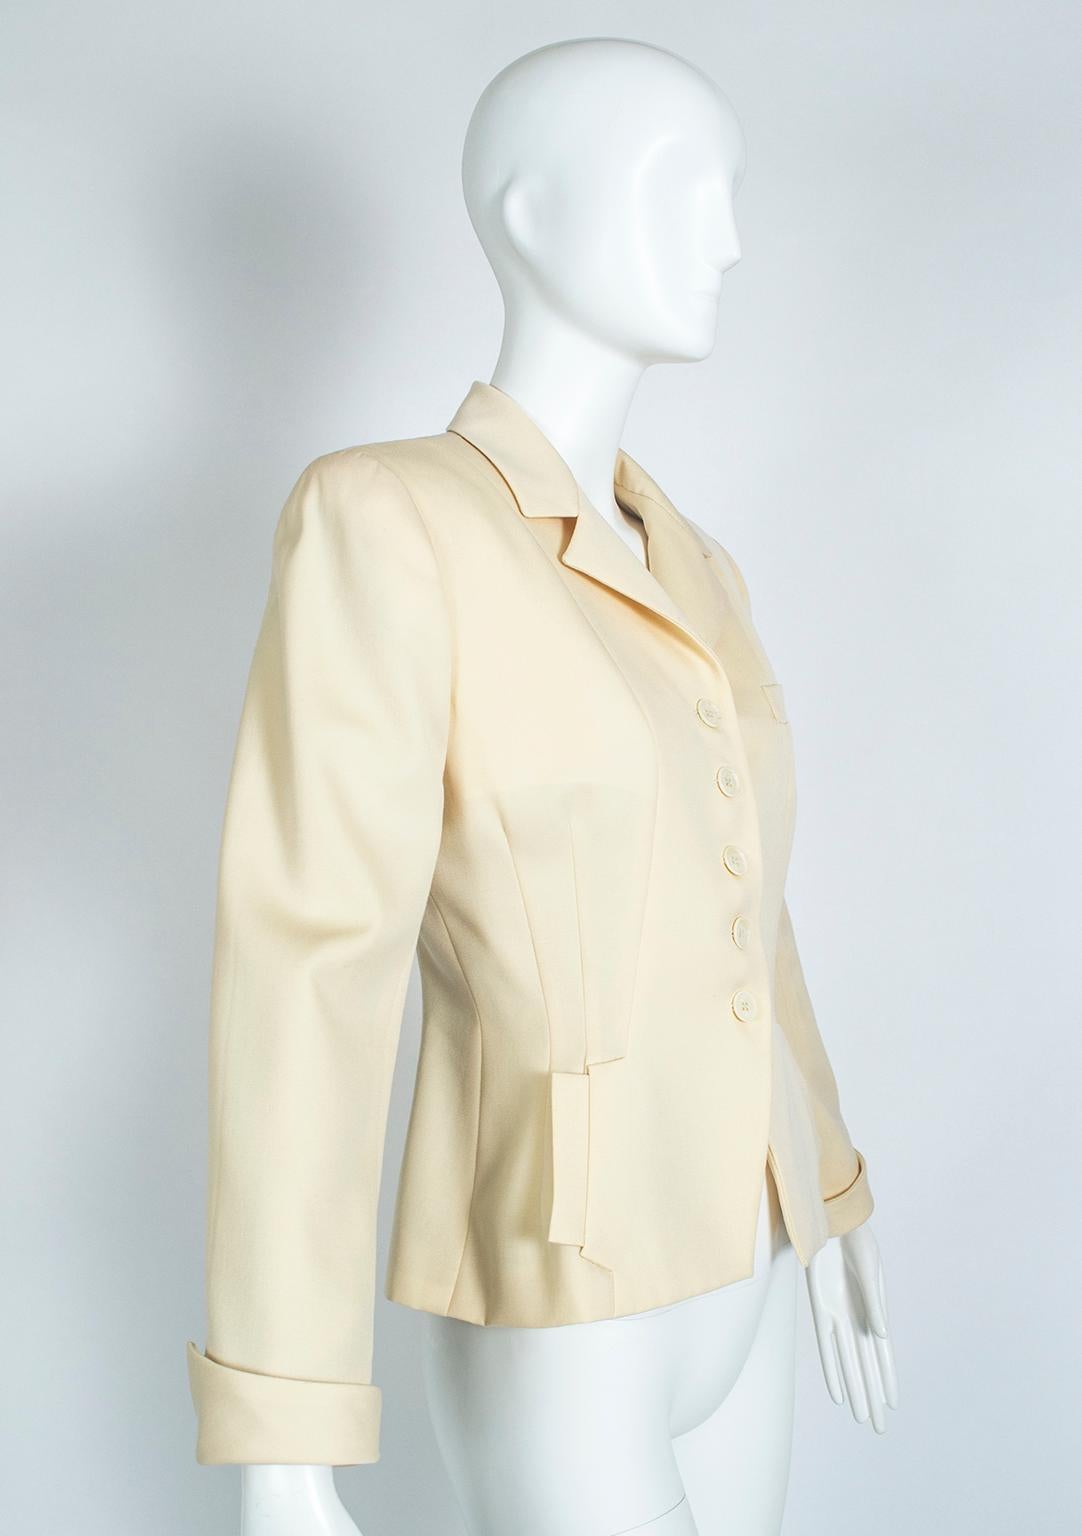 A dead-ringer for Dior’s groundbreaking 1947 Bar Jacket, this blazer features the same sculpted silhouette as its predecessor with modernized details like sharp shoulders and tiered inseam pockets. The best of both worlds.

Sculpted peplum jacket